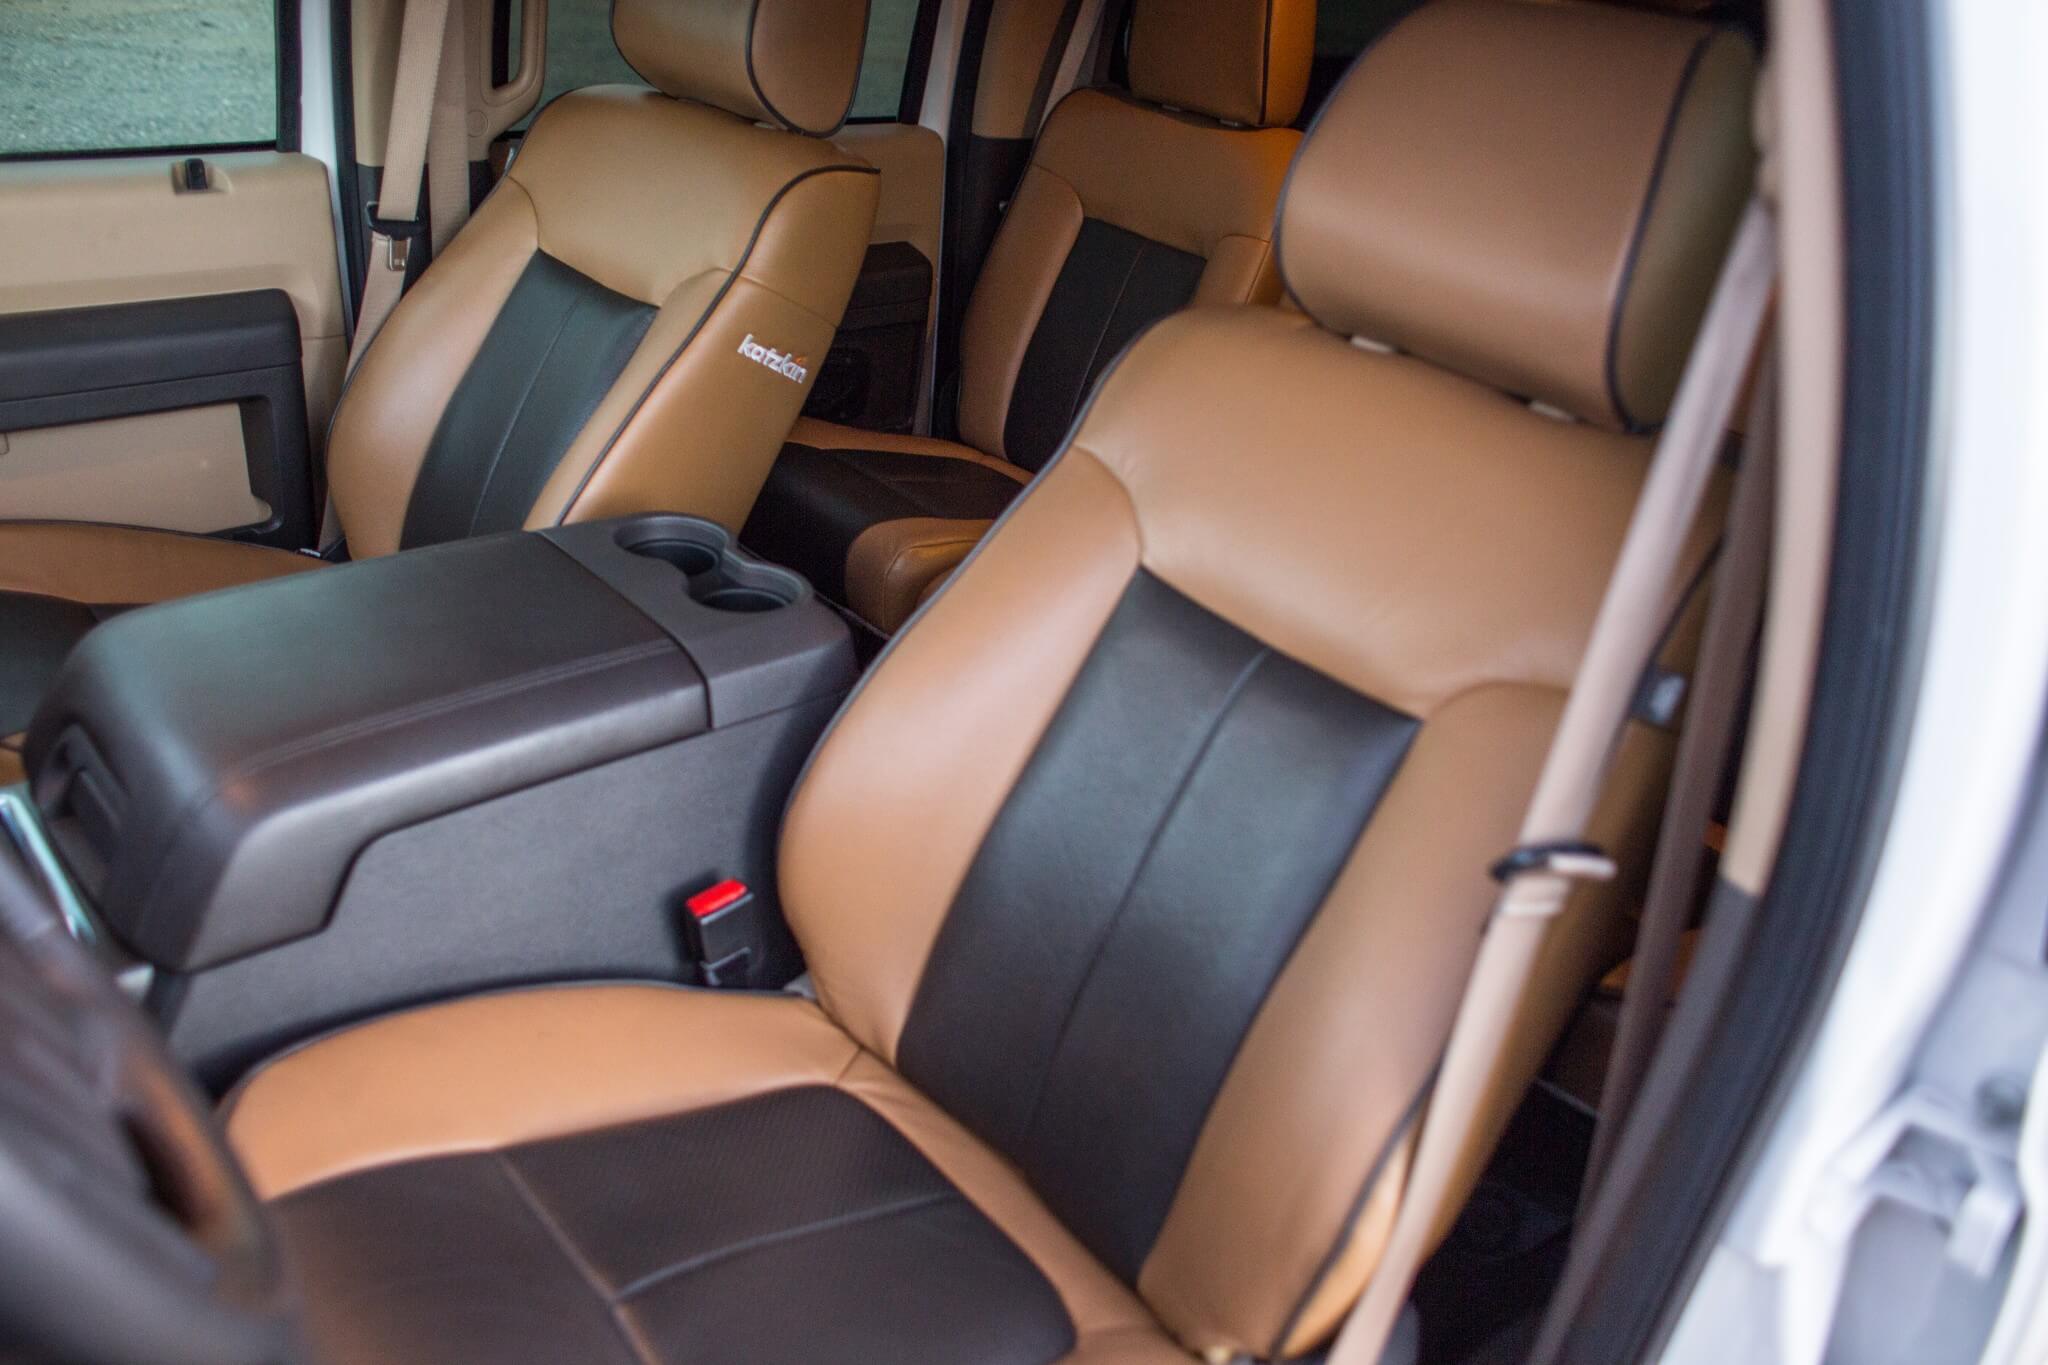 The interior was made luxurious with the help of leather seat covers from Katzkin.